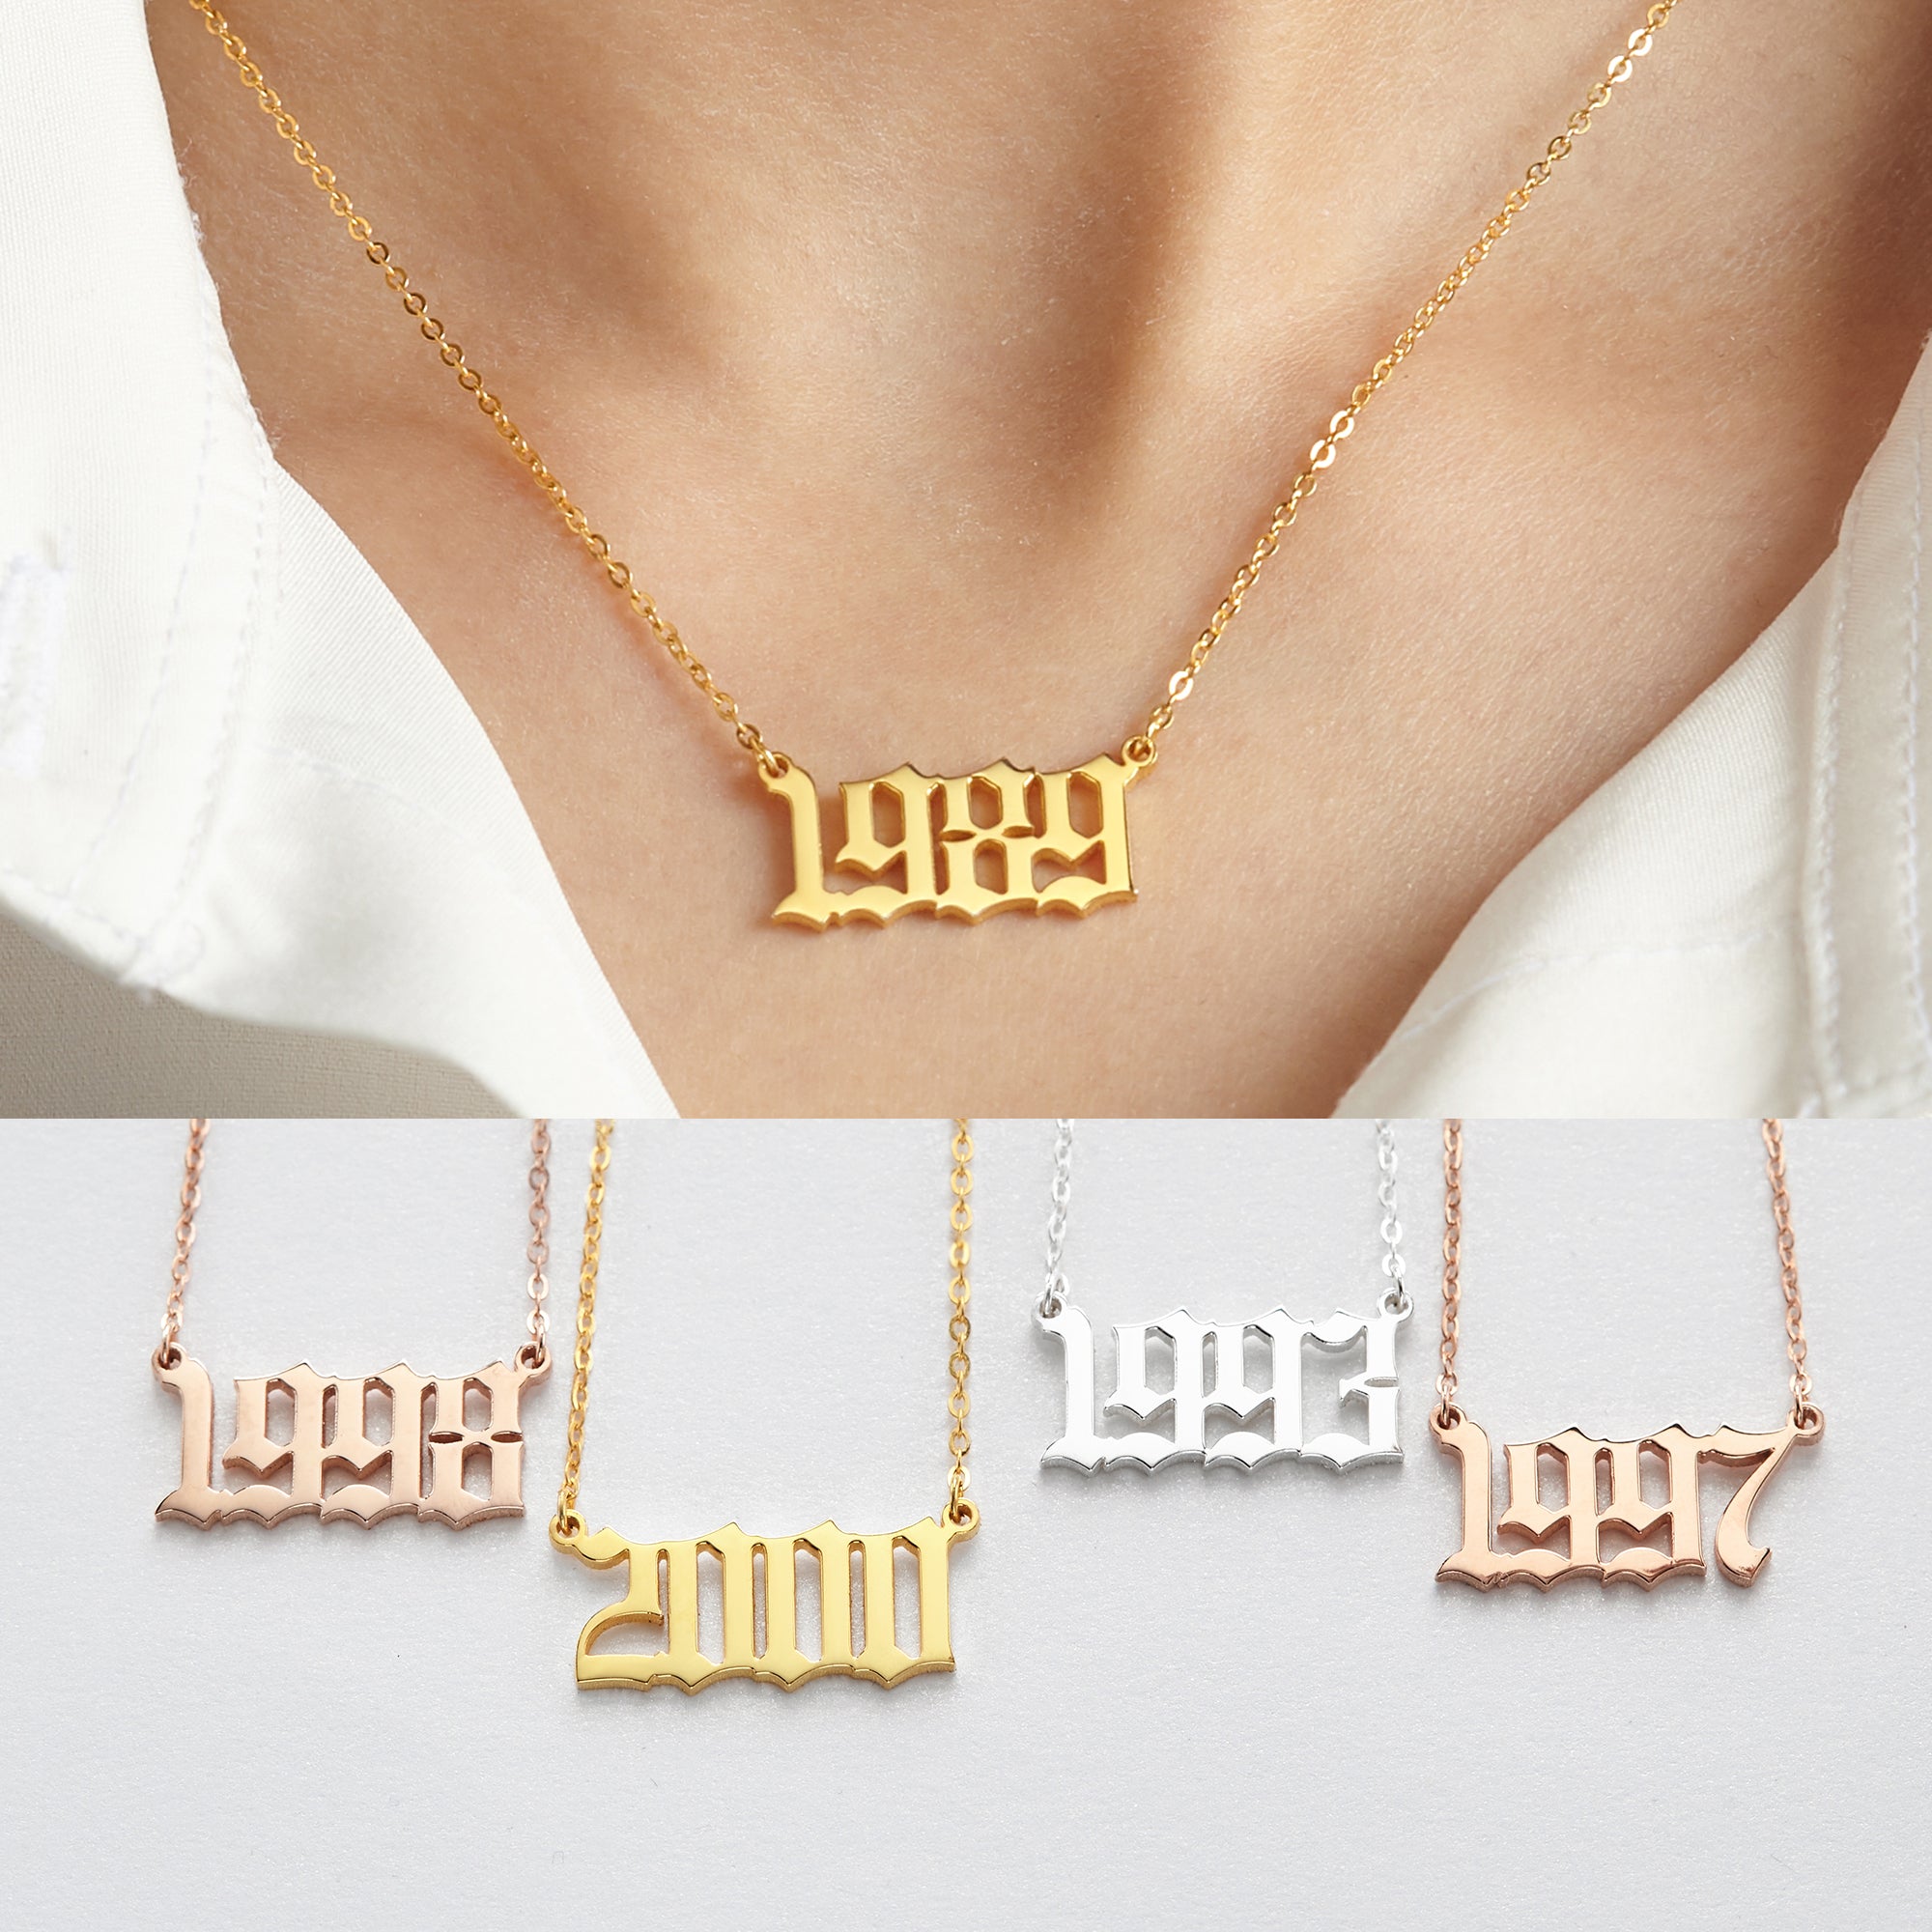 Personalized Year Necklace - 925 Sterling Silver & 18K Gold Plated Jewelry for Her - Necklaces - Bijou Her -  -  - 